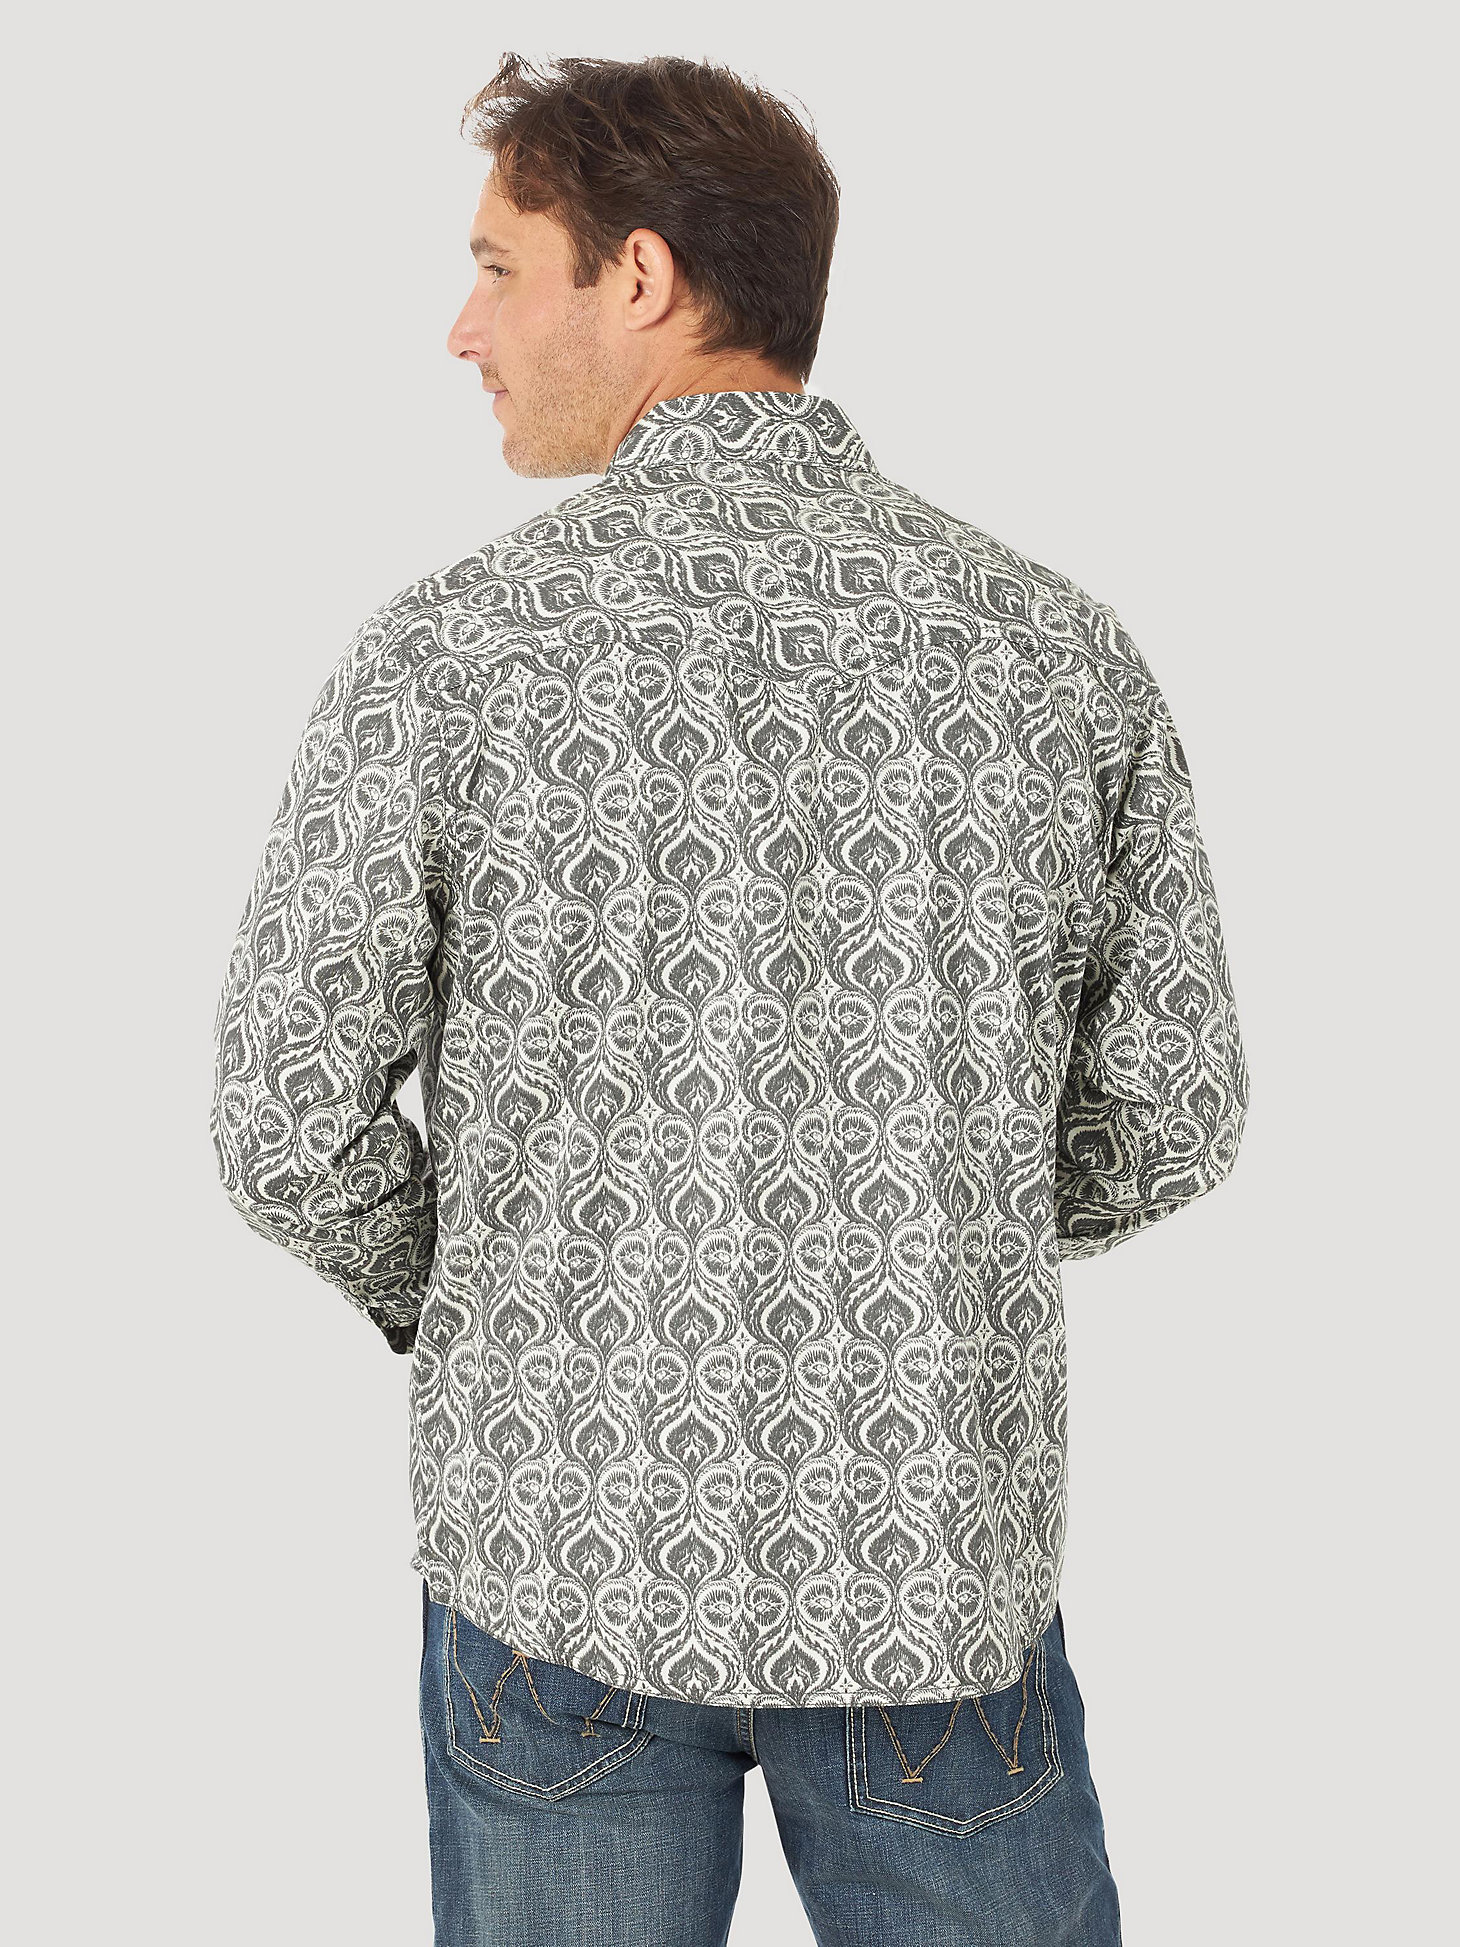 Men's Wrangler Retro® Long Sleeve Western Snap Printed Shirt in Grey Feathers alternative view 1